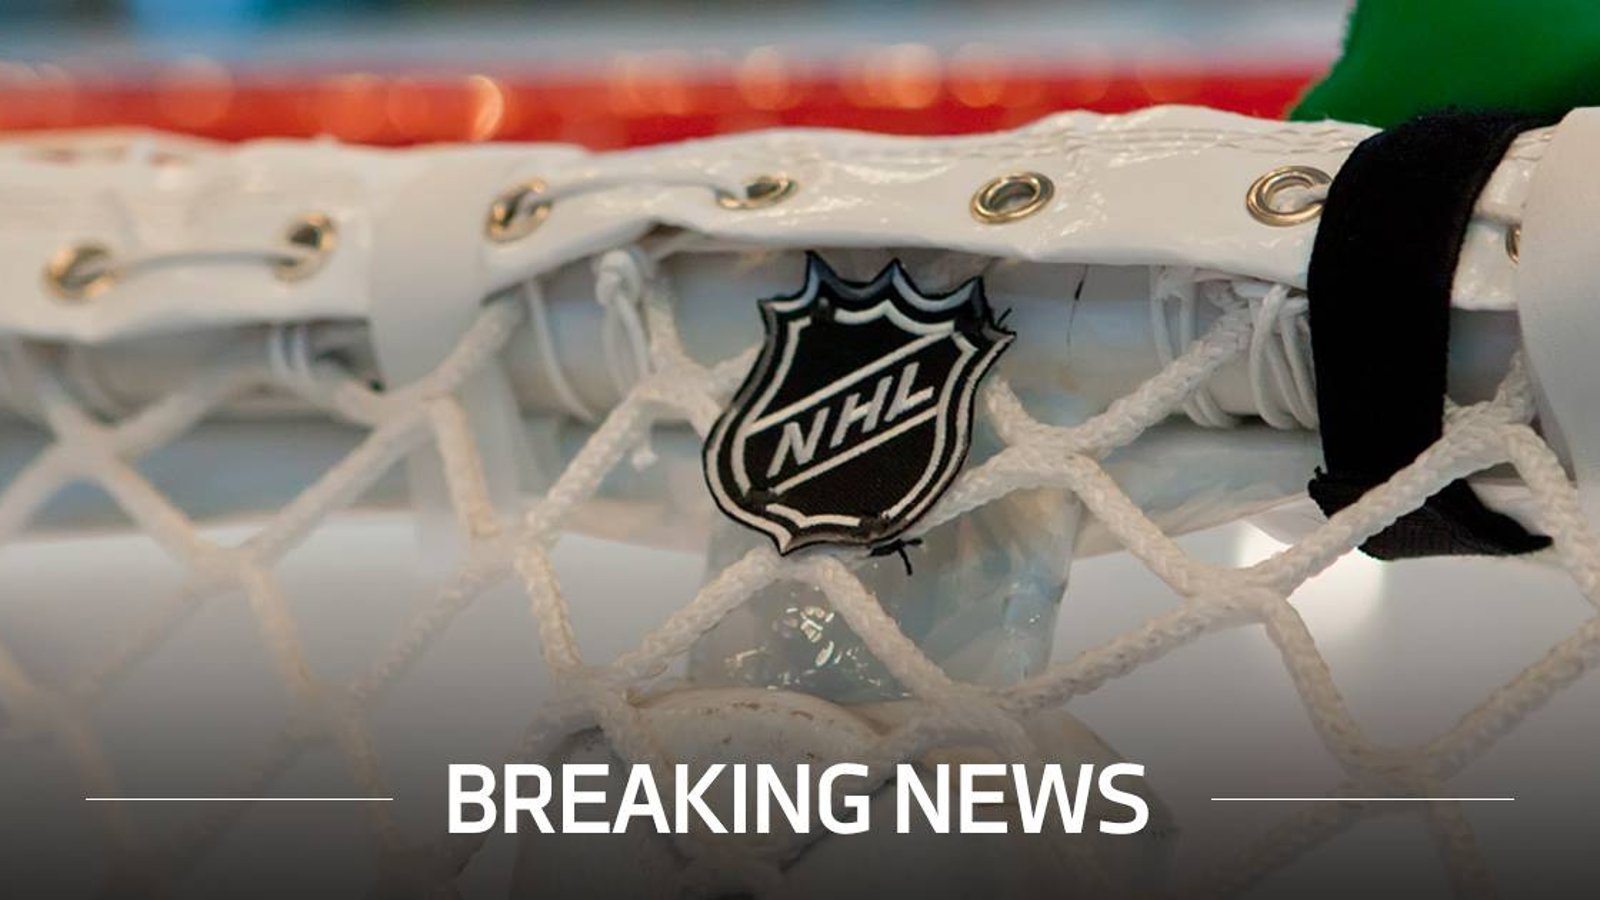 Breaking: AHL announces expansion into HUGE NHL market